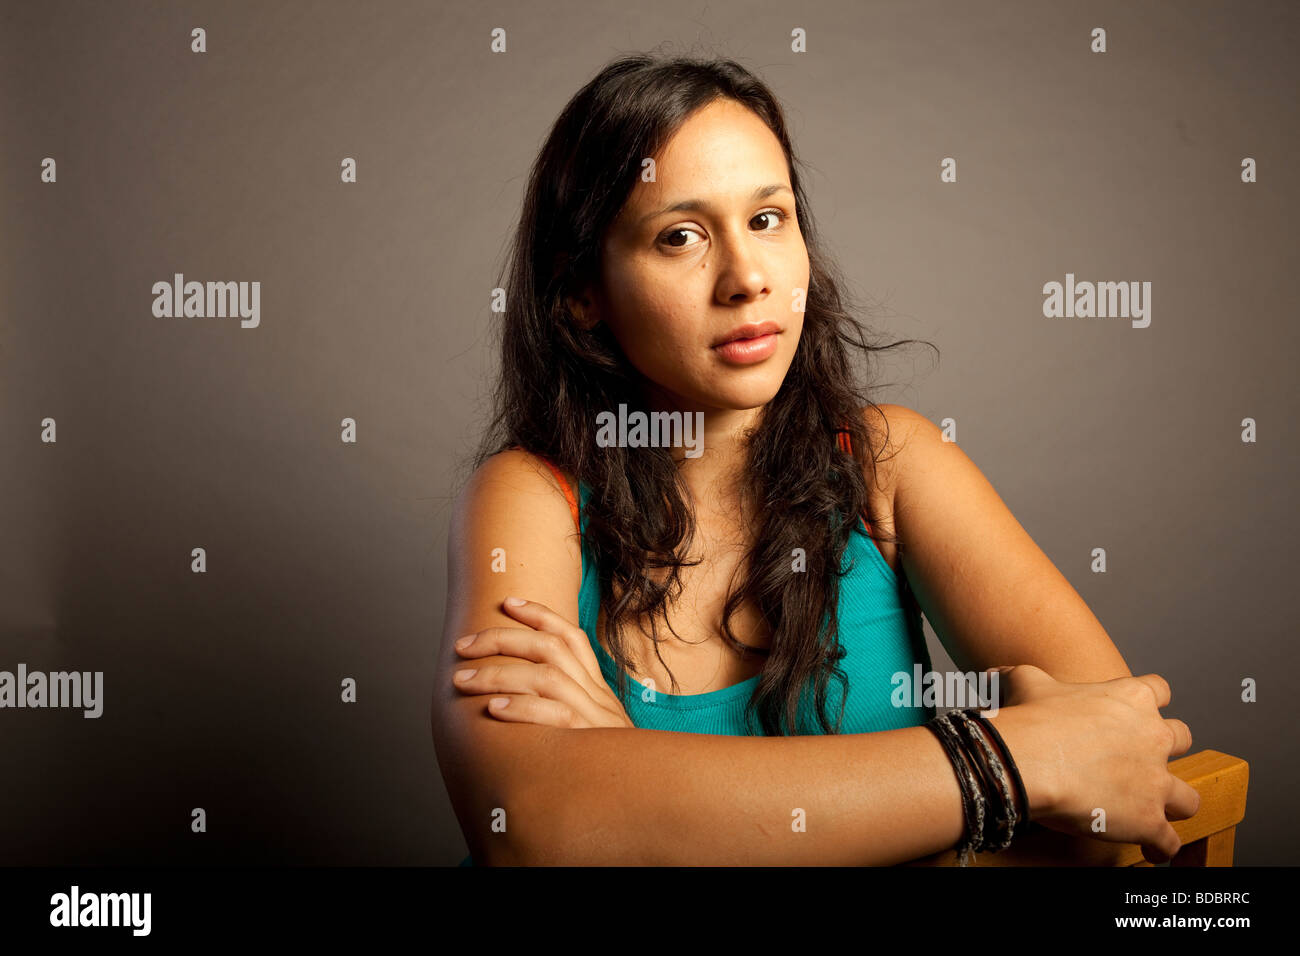 Portrait of Hispanic Latina female against gray background, she has serious expression, looking at camera. Stock Photo